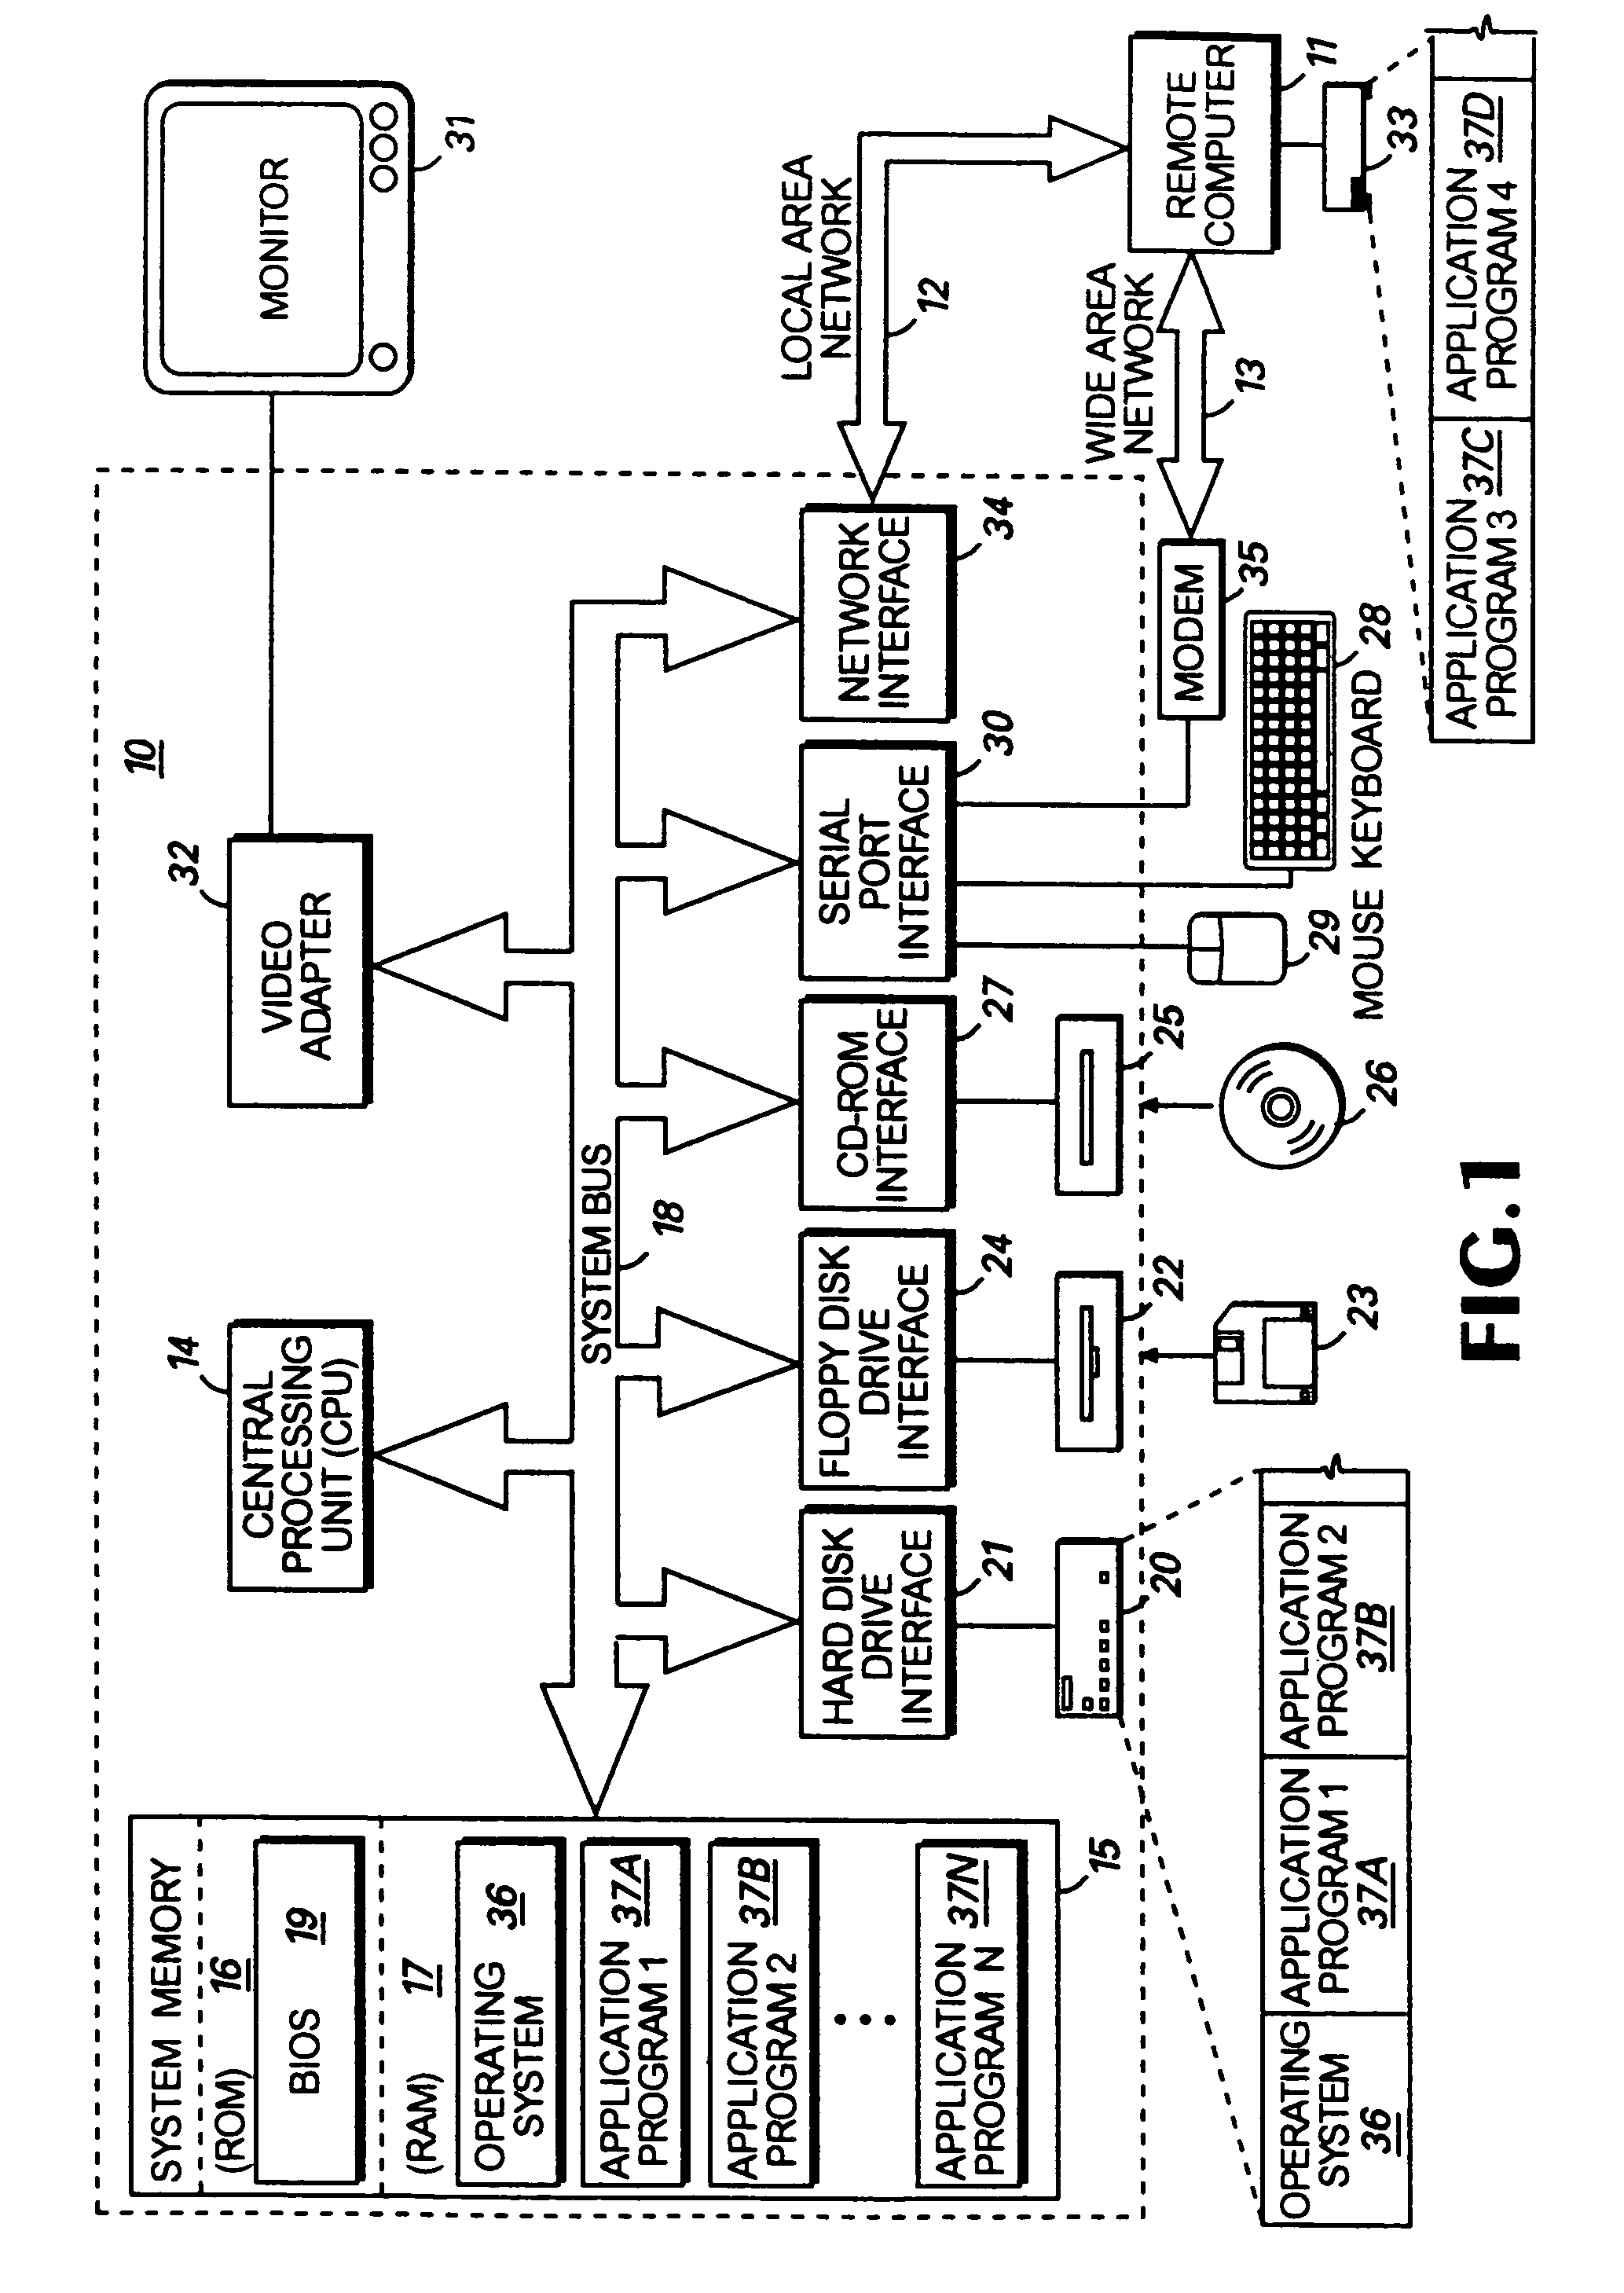 Method for automatically implementing special forms in an e-mail system